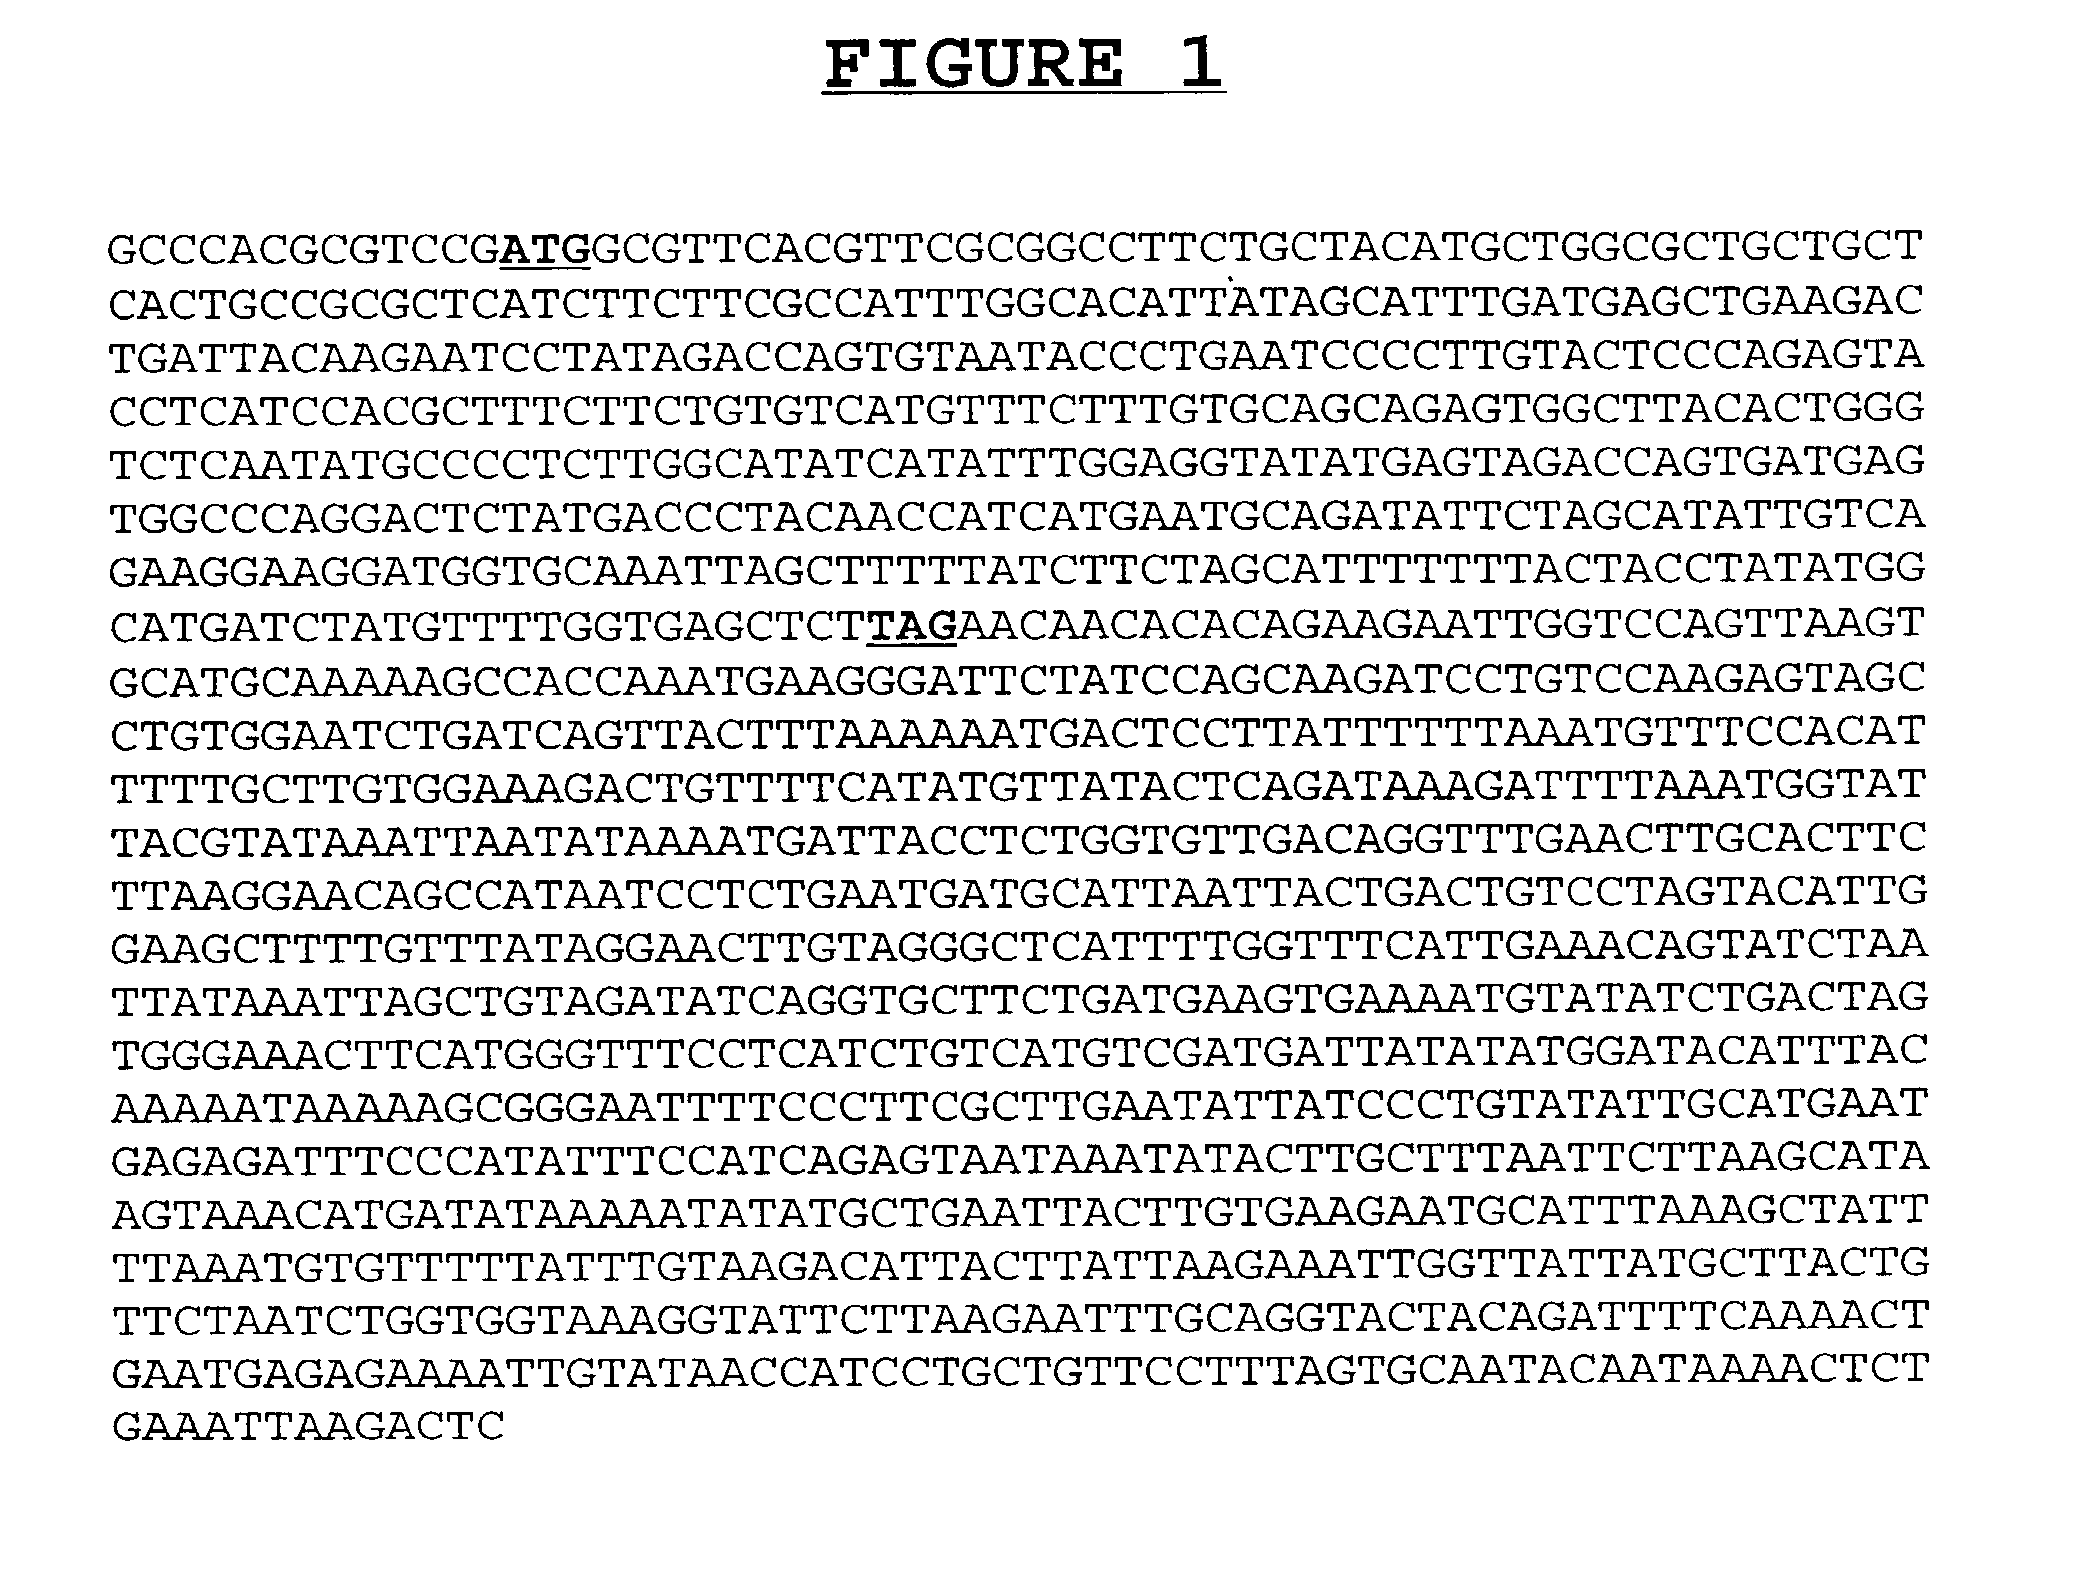 Compositions and methods for the diagnosis and treatment of disorders involving angiogenesis